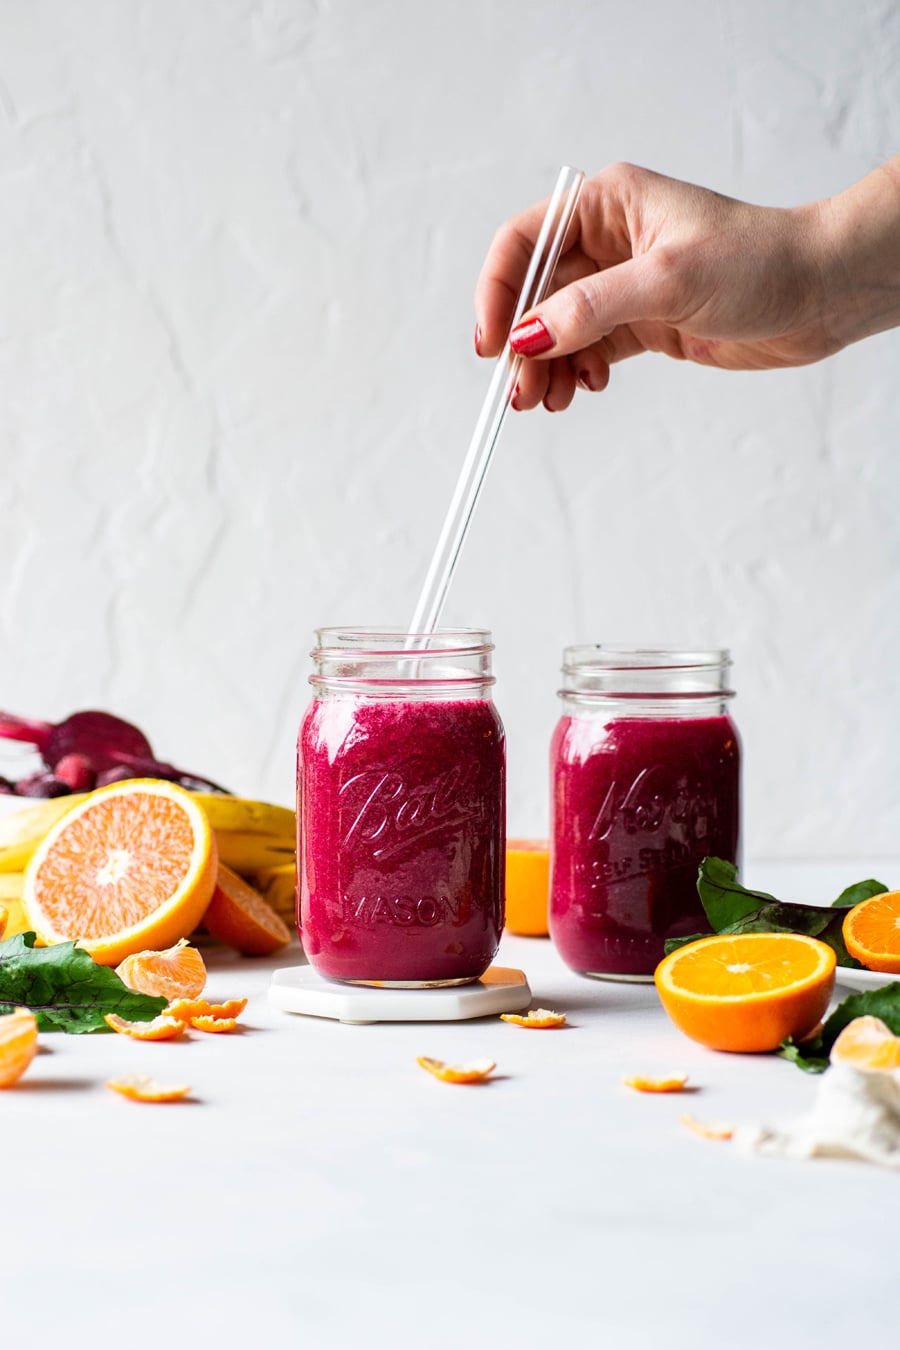 Straight on shot of 2 glass ball jars filled with a vibrant pink / red glowing beet smoothie. On a light background surrounded by fresh cut fruit, with a hand reaching into the frame to place a glass straw into one of the ball jars. 